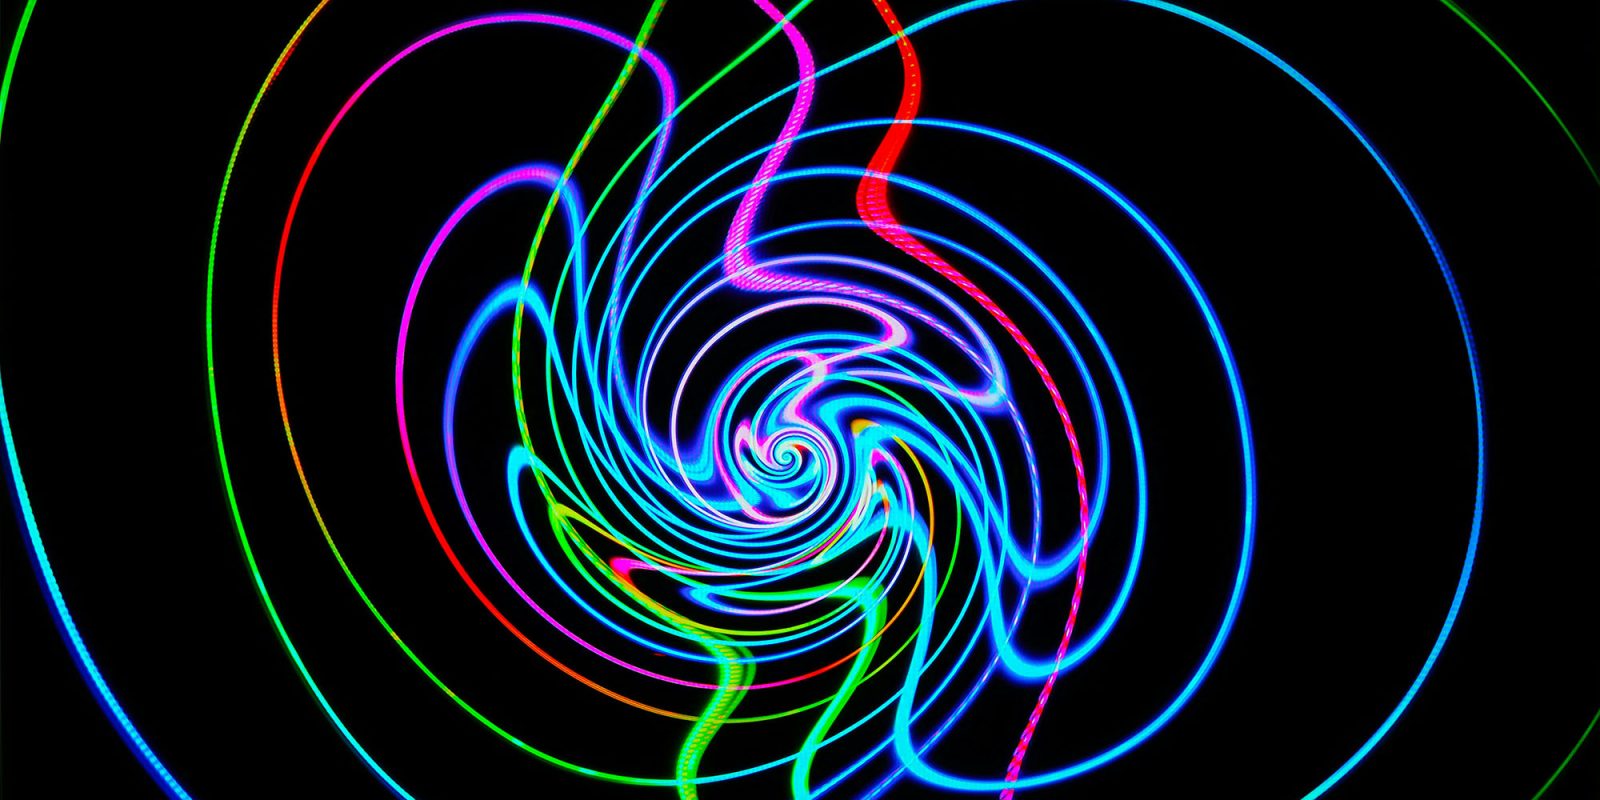 Apple Intelligence may hallucinate | Abstract psychedelic image reminiscent of Siri